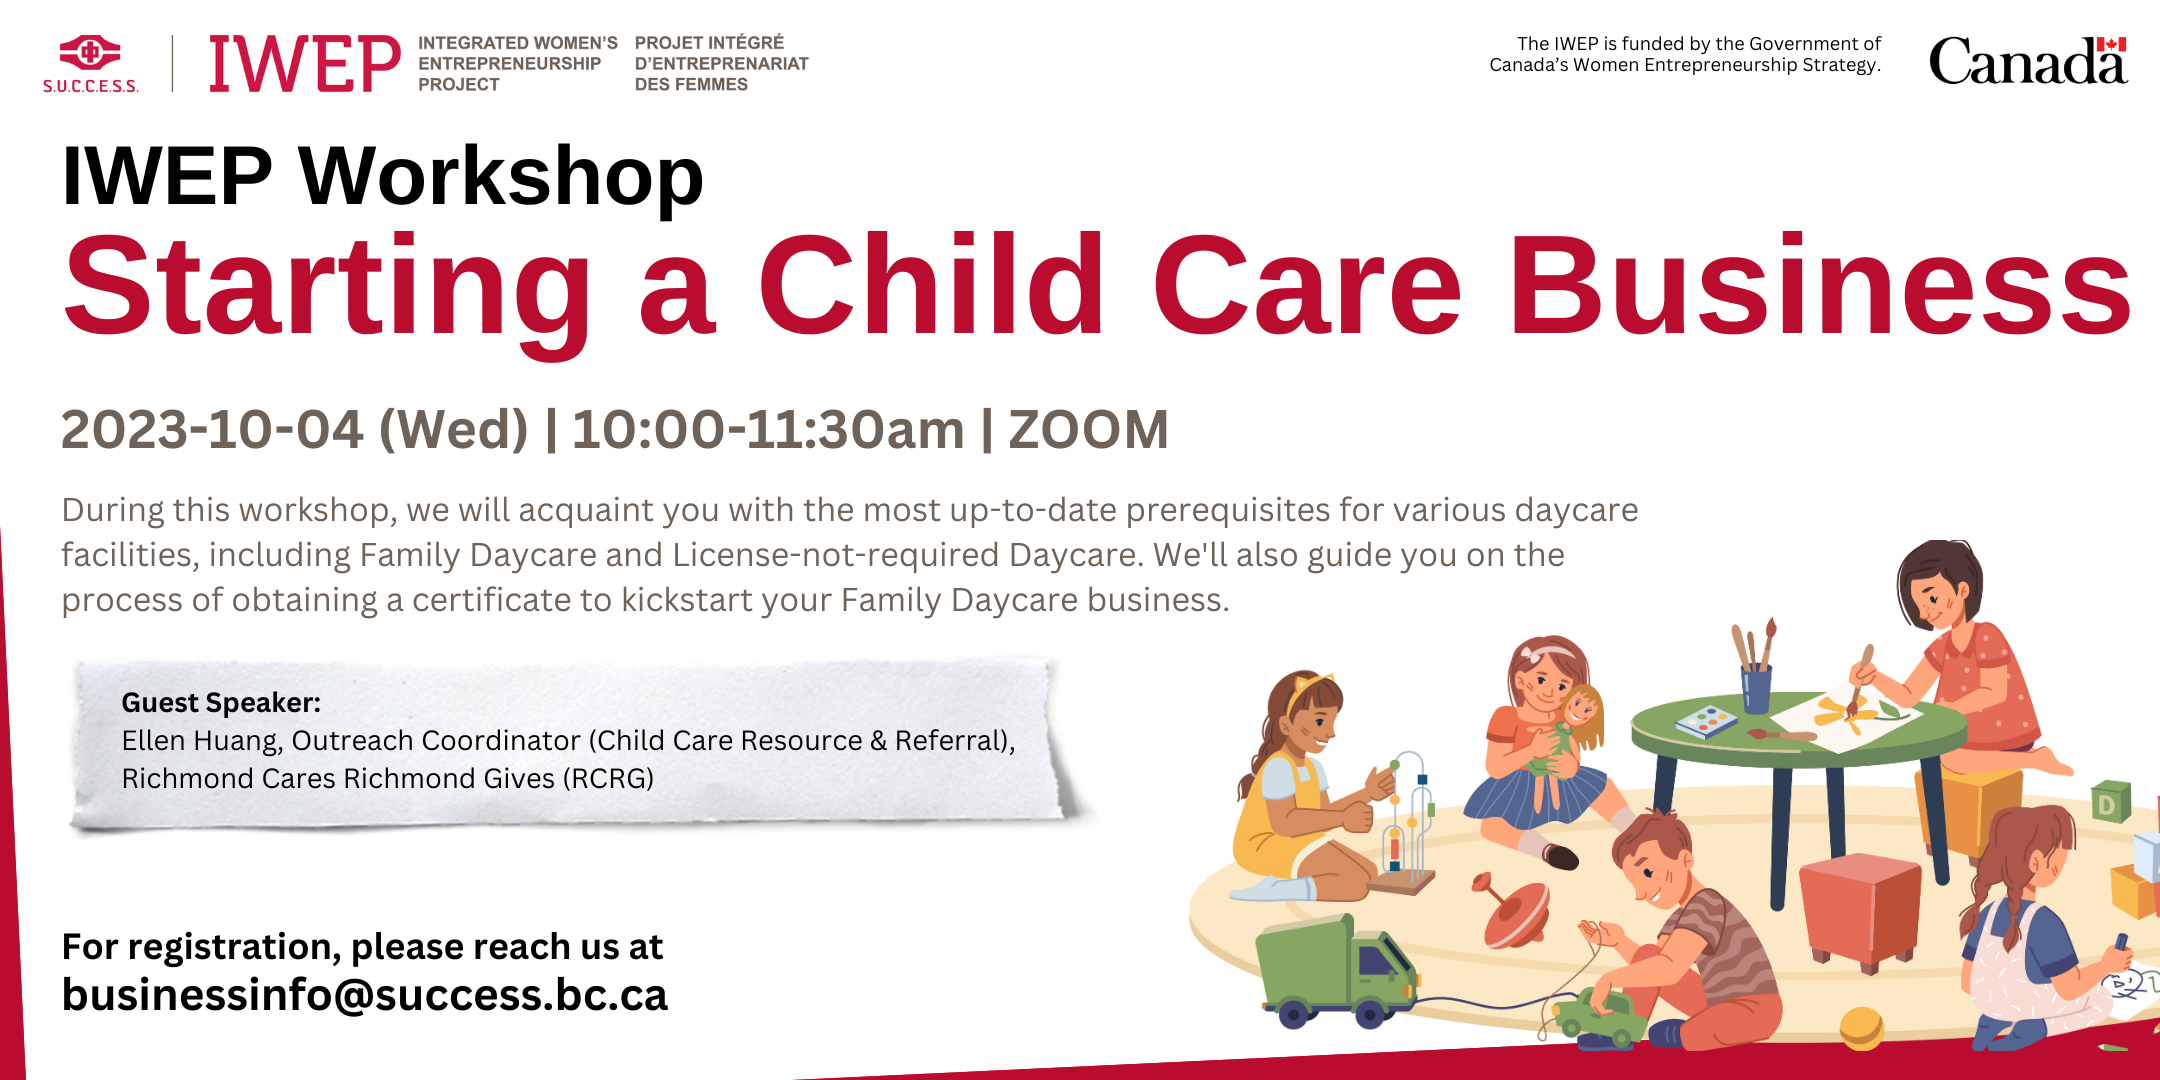 IWEP Workshop - Starting a Child Care Business, Online Event